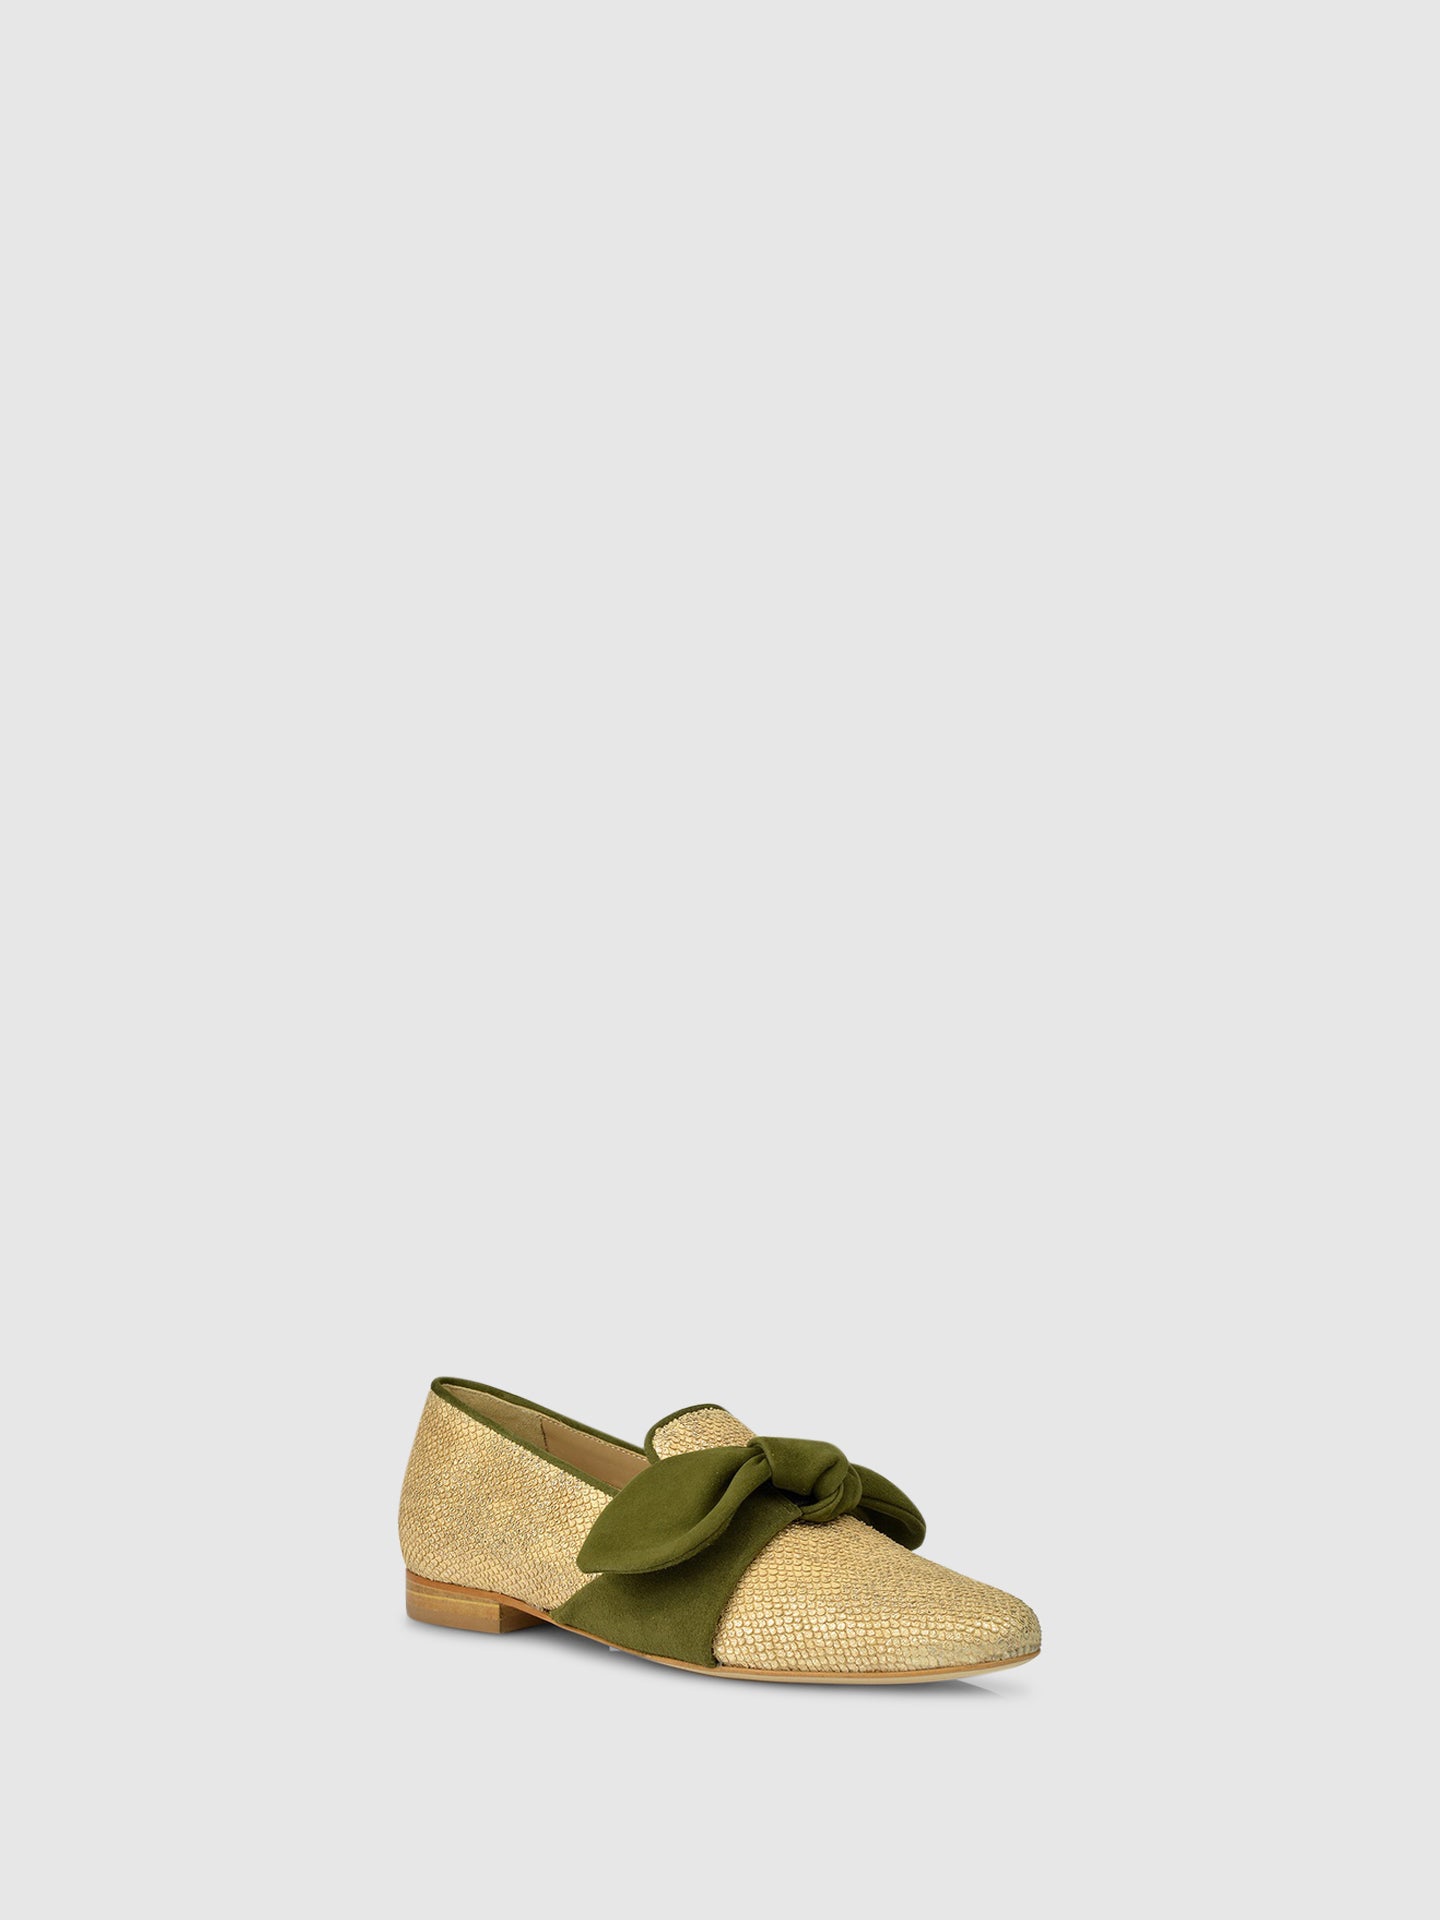 JJ Heitor Bow Loafers D01L2 Gold/Green